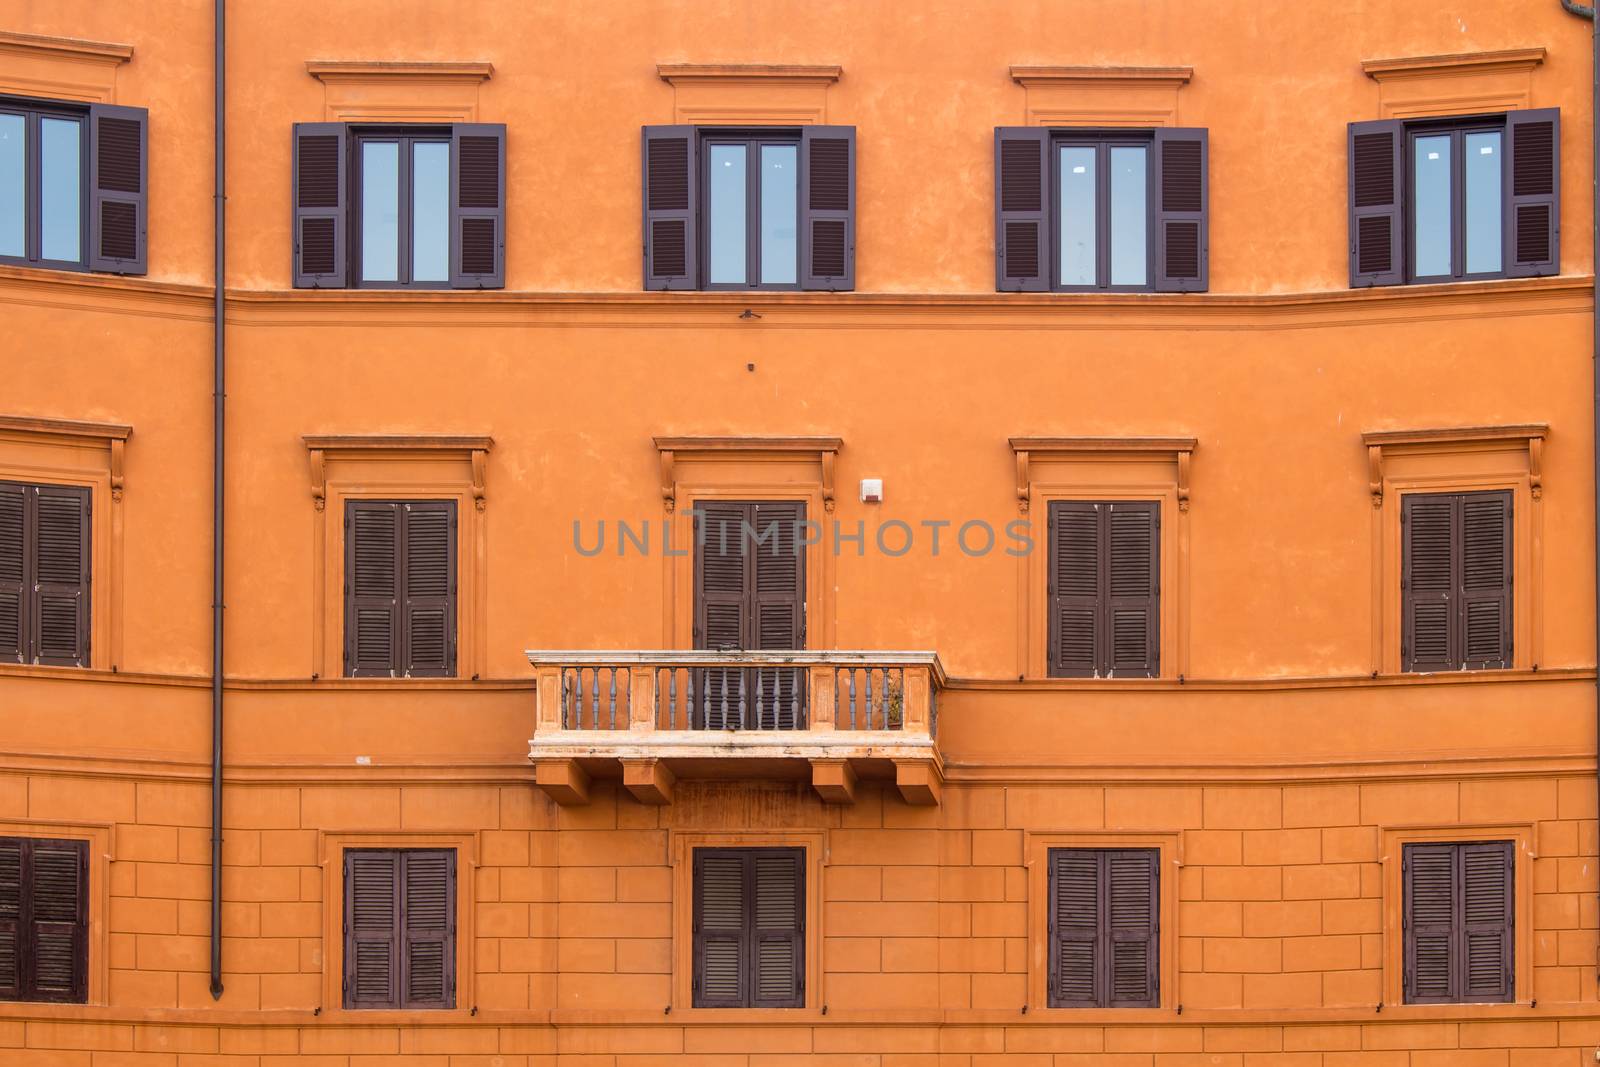 Typical orange color of the facade of a house in Rome. Windows reflecting the sky. Rome, Italy.